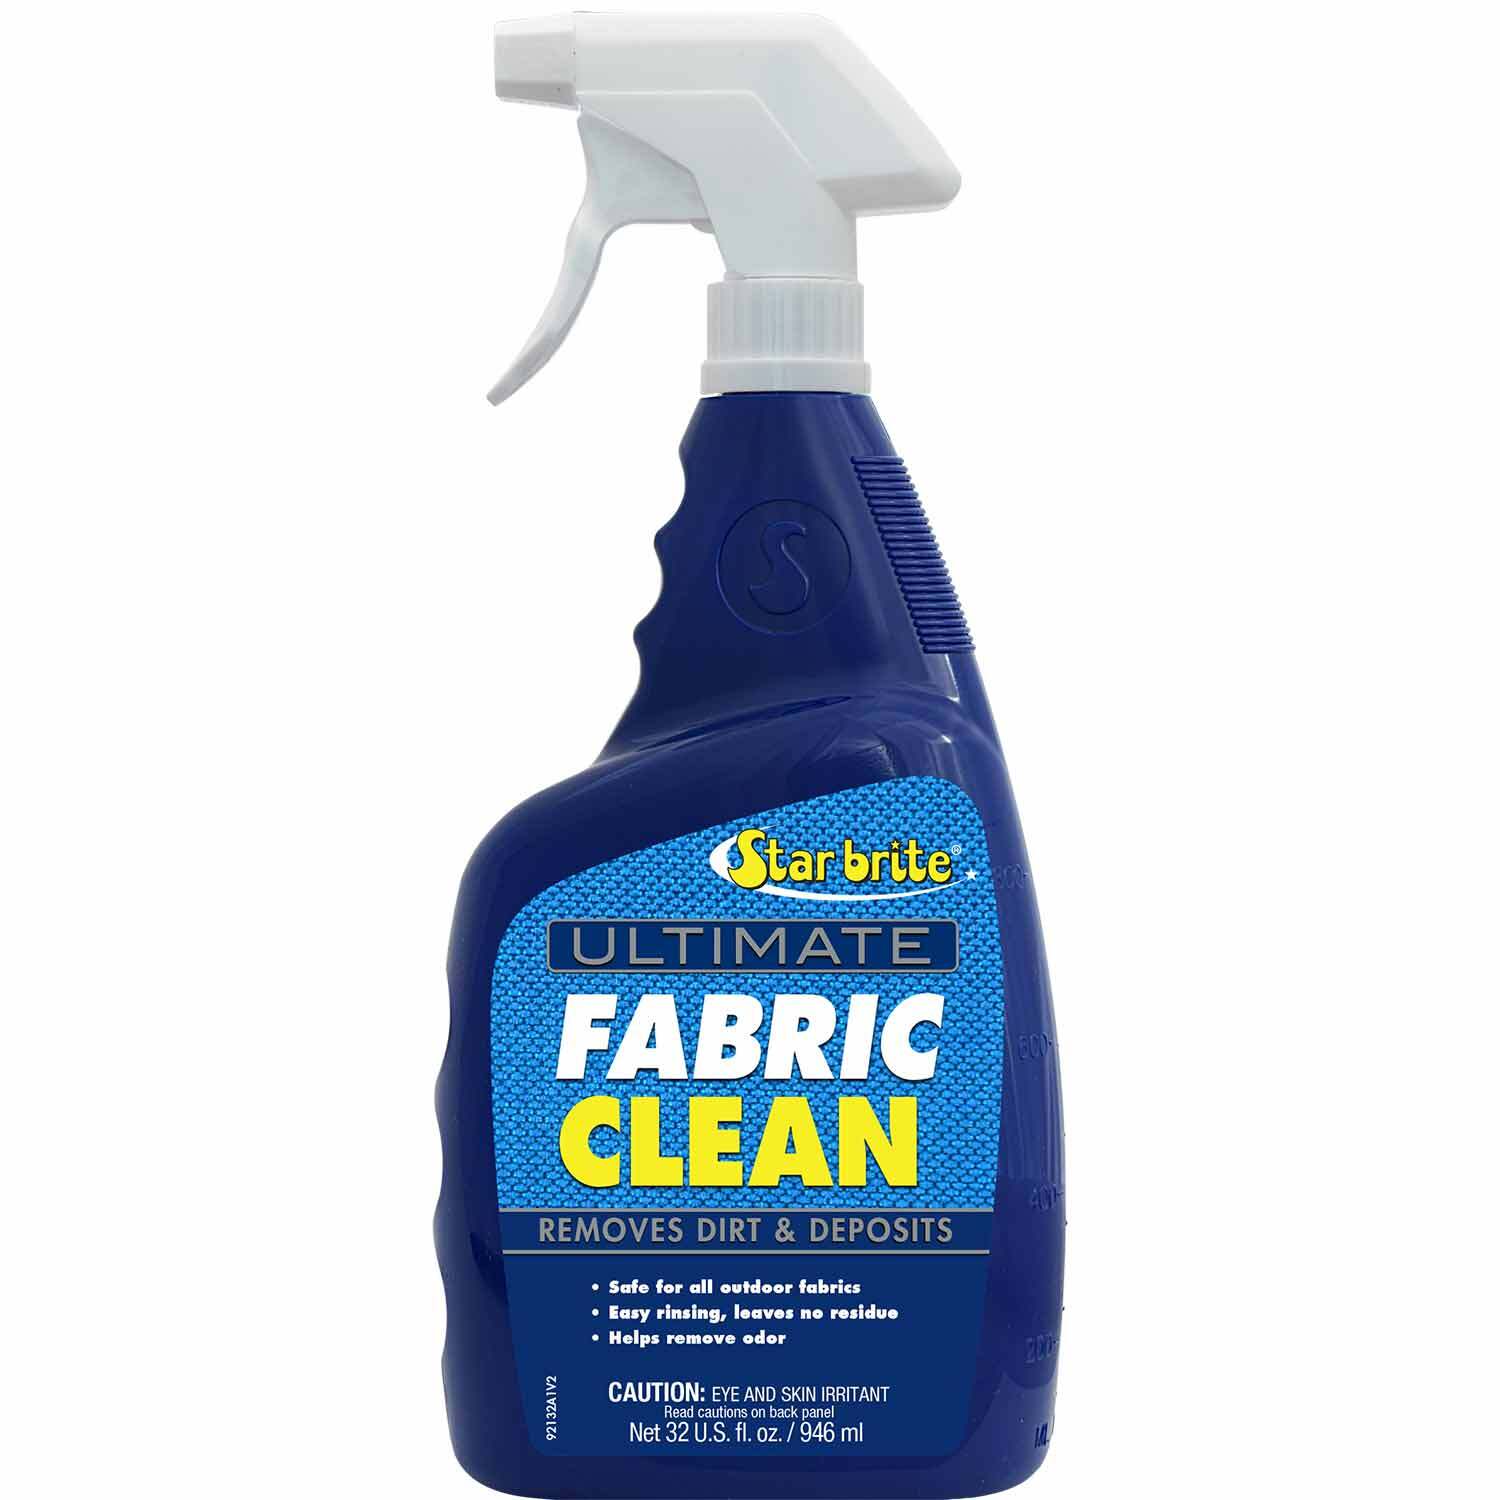 STAR BRITE Ultimate Fabric Cleaner and Protectant with PTEF